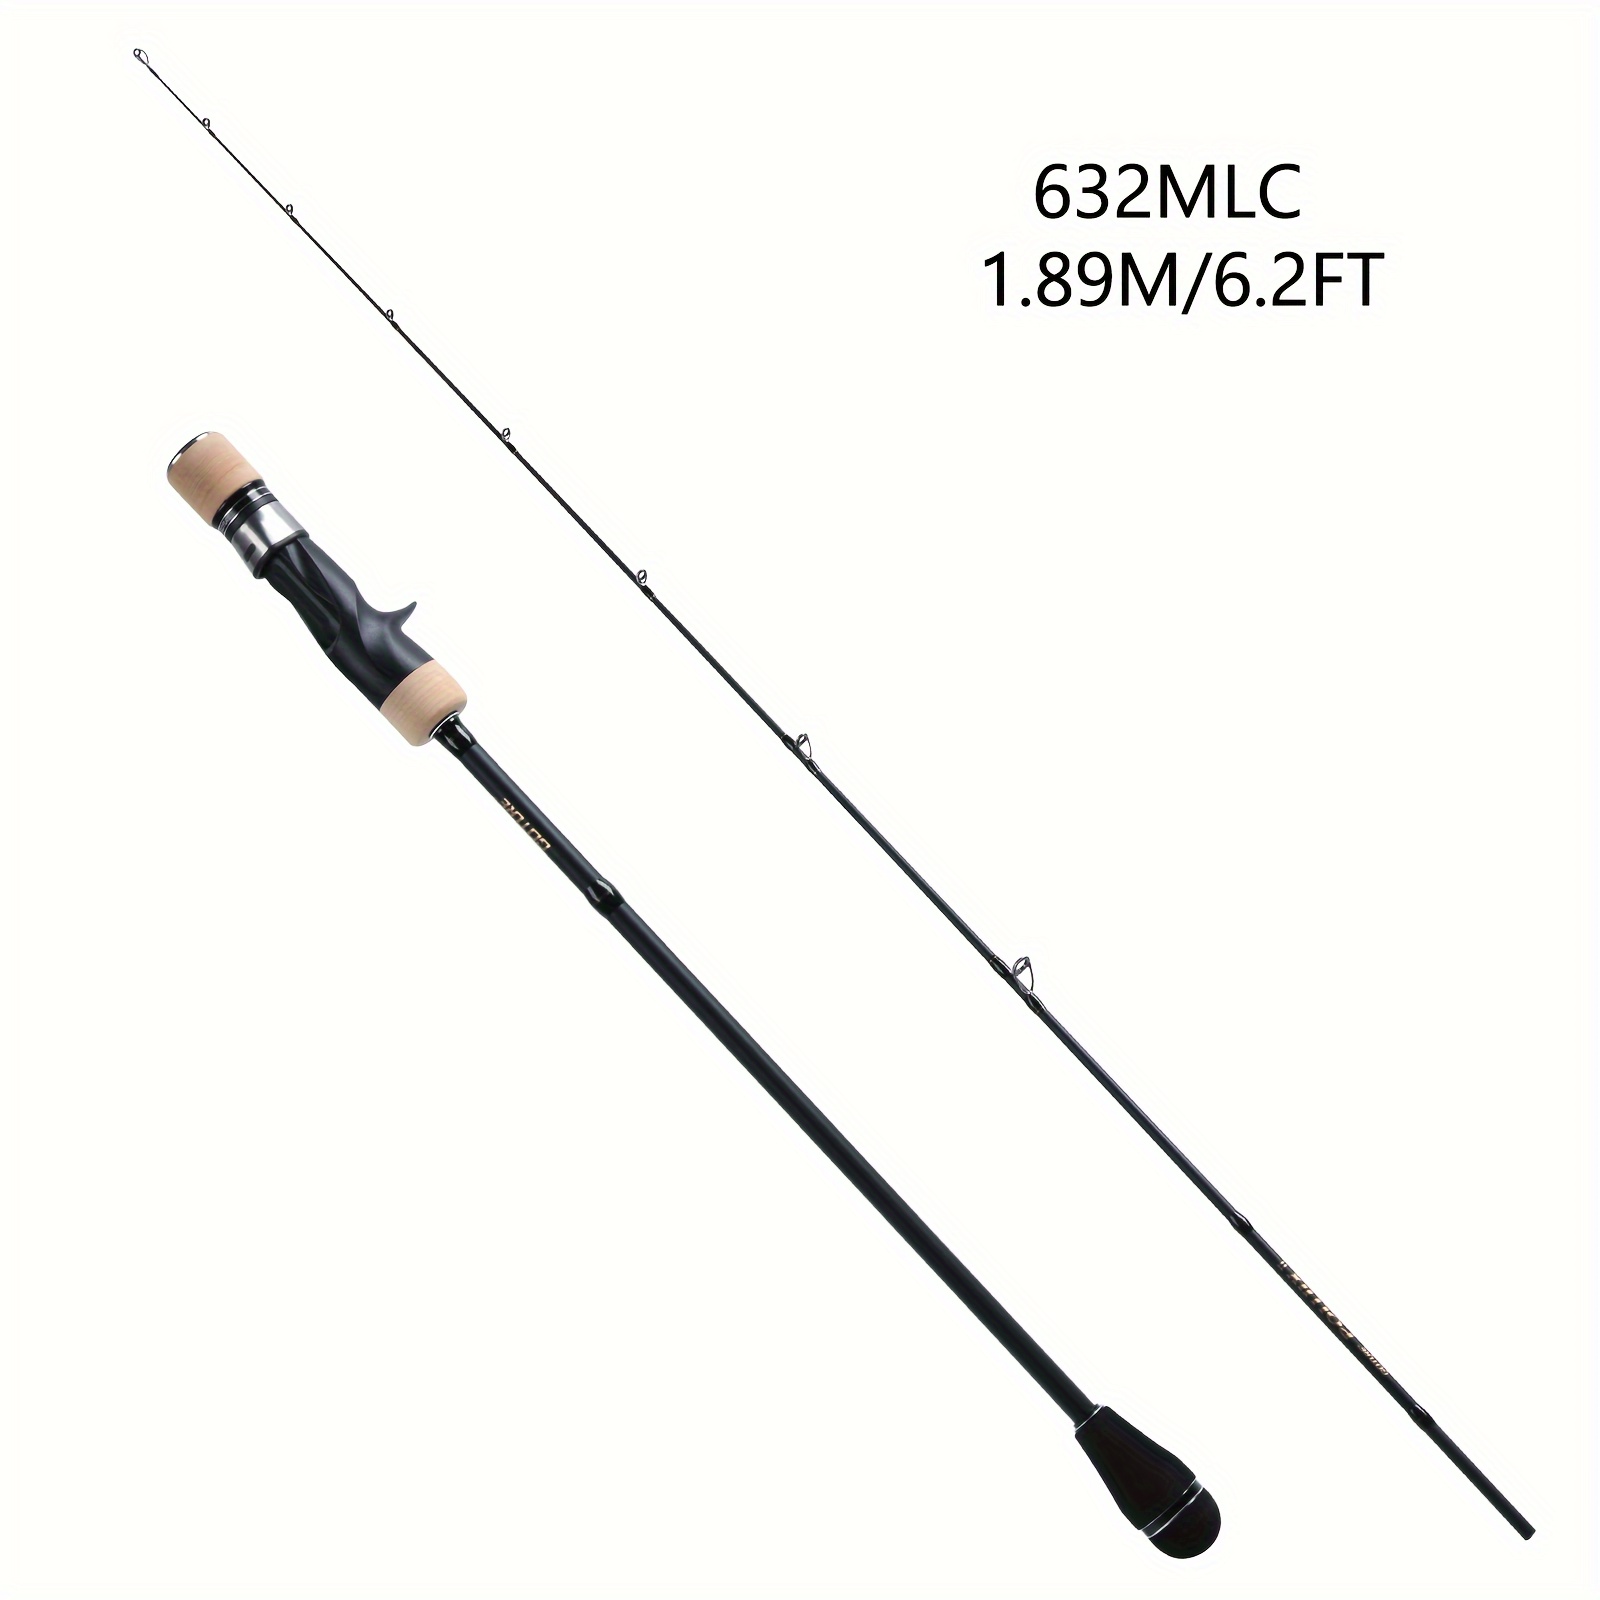 * Pollux 1.89m/6.2ft Jigging Carbon Spinning/Casting Rod, 2-piece Slow  Shake Solid Fishing Rod - Fishing Pole For Saltwater * Trout, Bass